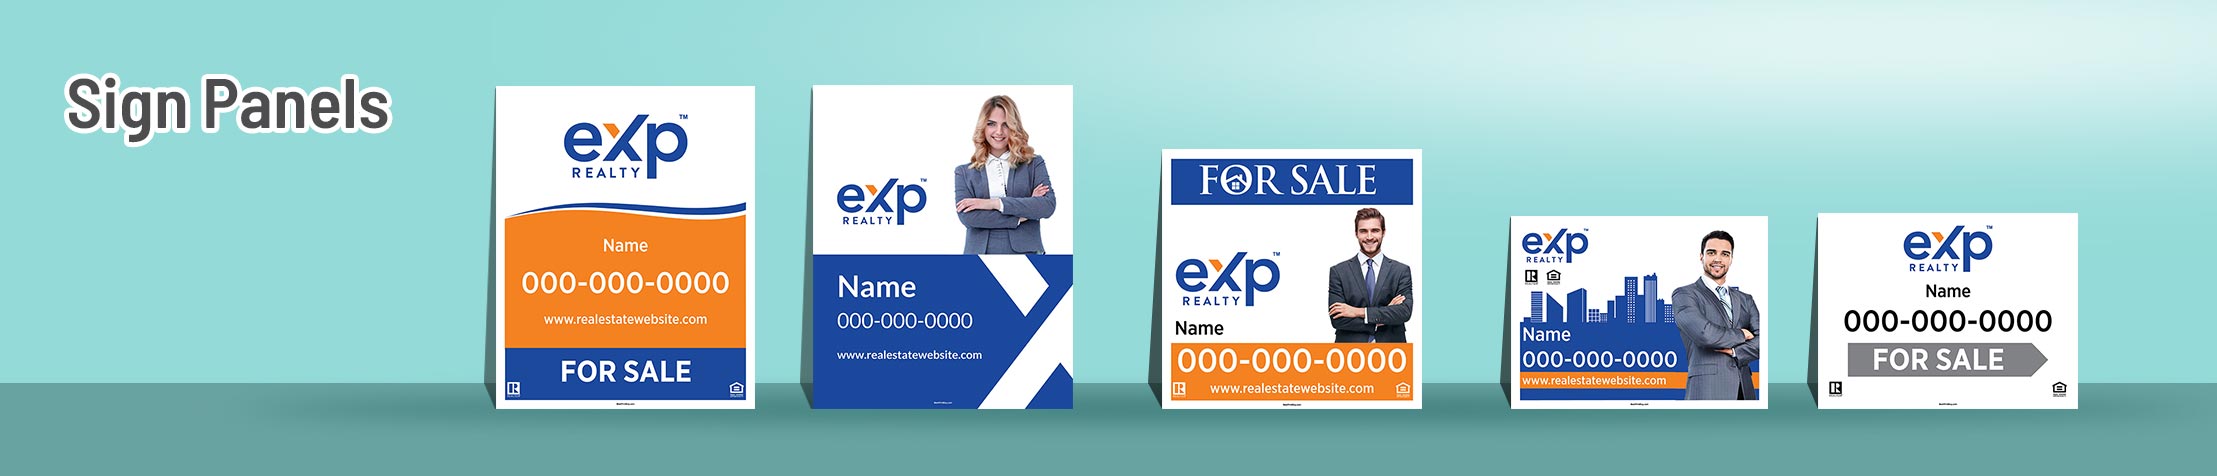 eXp Realty Real Estate 18